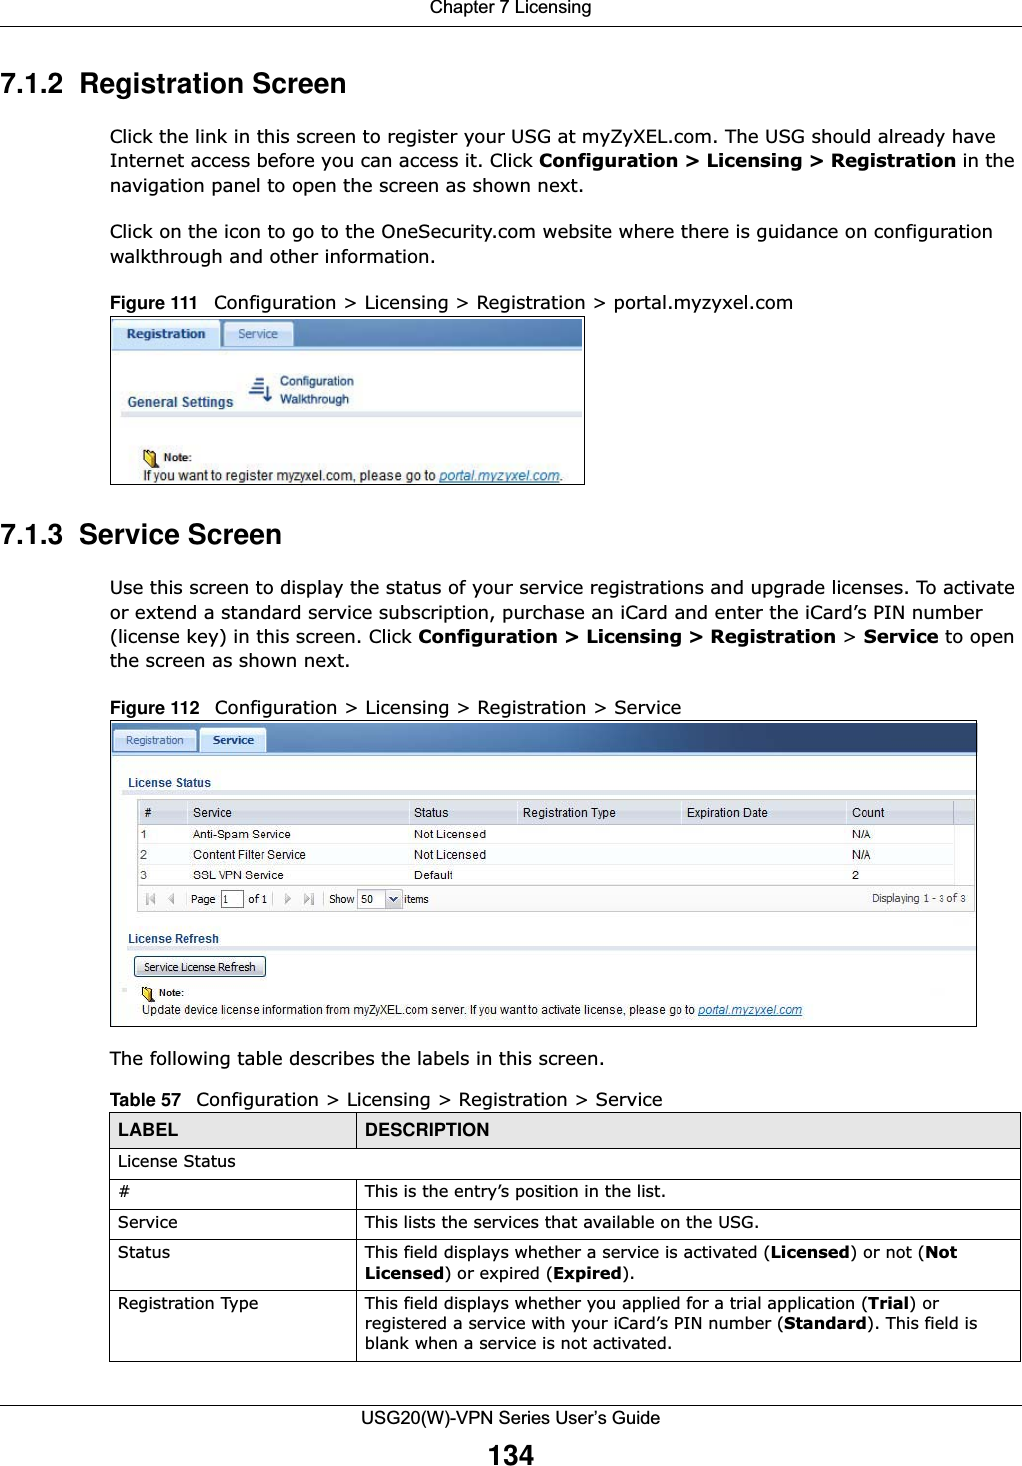 Chapter 7 LicensingUSG20(W)-VPN Series User’s Guide1347.1.2  Registration ScreenClick the link in this screen to register your USG at myZyXEL.com. The USG should already have Internet access before you can access it. Click Configuration &gt; Licensing &gt; Registration in the navigation panel to open the screen as shown next.Click on the icon to go to the OneSecurity.com website where there is guidance on configuration walkthrough and other information.Figure 111   Configuration &gt; Licensing &gt; Registration &gt; portal.myzyxel.com       7.1.3  Service ScreenUse this screen to display the status of your service registrations and upgrade licenses. To activate or extend a standard service subscription, purchase an iCard and enter the iCard’s PIN number (license key) in this screen. Click Configuration &gt; Licensing &gt; Registration &gt; Service to open the screen as shown next.Figure 112   Configuration &gt; Licensing &gt; Registration &gt; Service   The following table describes the labels in this screen.  Table 57   Configuration &gt; Licensing &gt; Registration &gt; ServiceLABEL DESCRIPTIONLicense Status# This is the entry’s position in the list.Service This lists the services that available on the USG. Status This field displays whether a service is activated (Licensed) or not (Not Licensed) or expired (Expired).Registration Type This field displays whether you applied for a trial application (Trial) or registered a service with your iCard’s PIN number (Standard). This field is blank when a service is not activated.